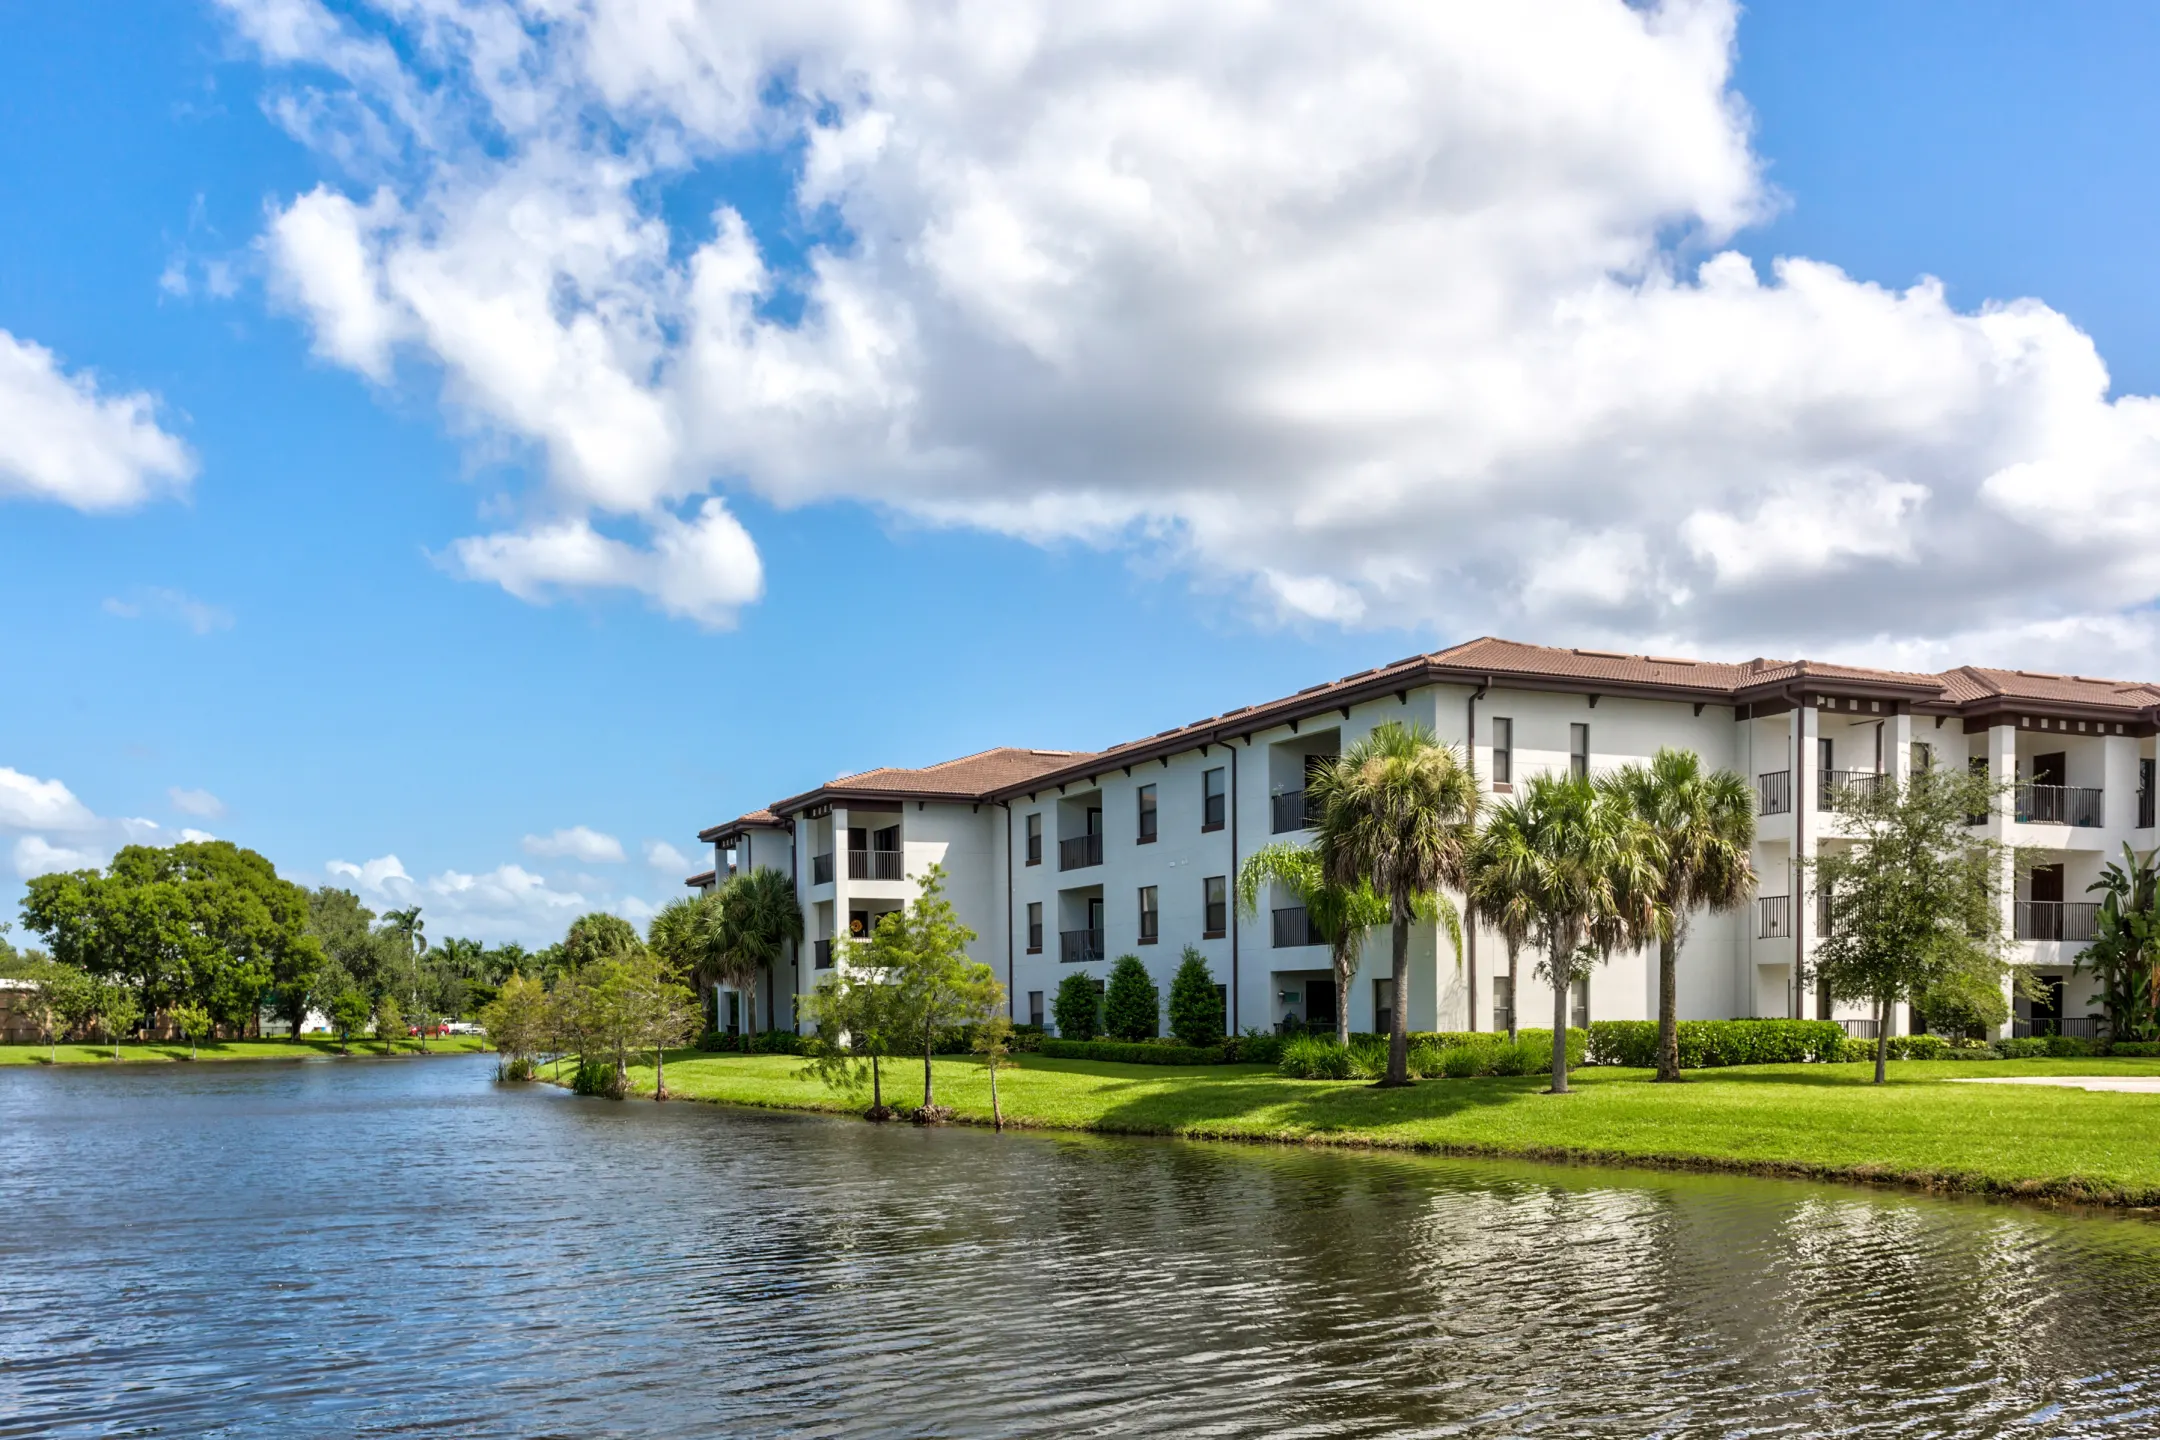 Building - Channelside Contemporary Living Apartments - Fort Myers, FL